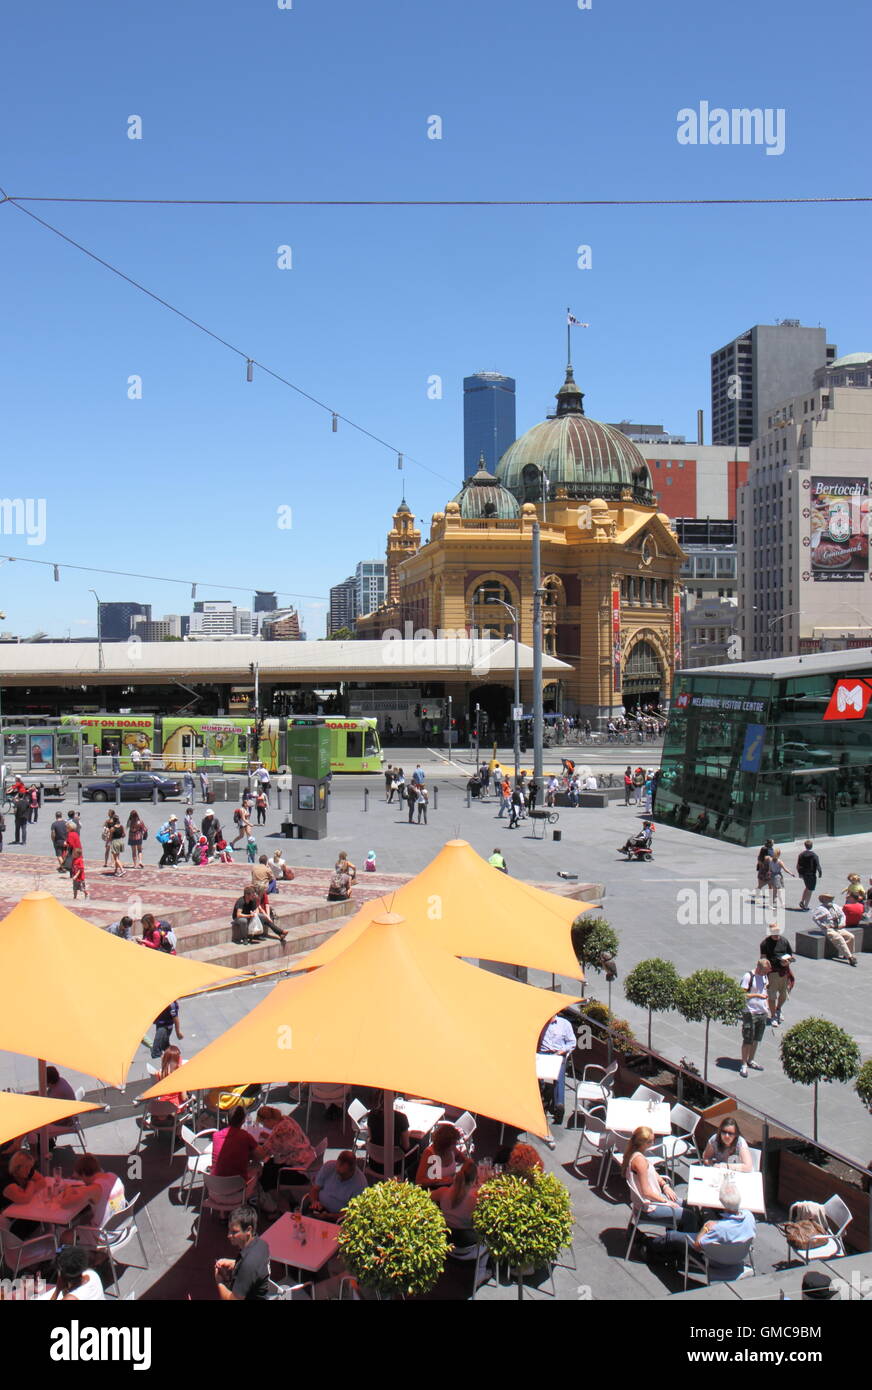 People relax in Federation Square in Melbourne Australia. Stock Photo